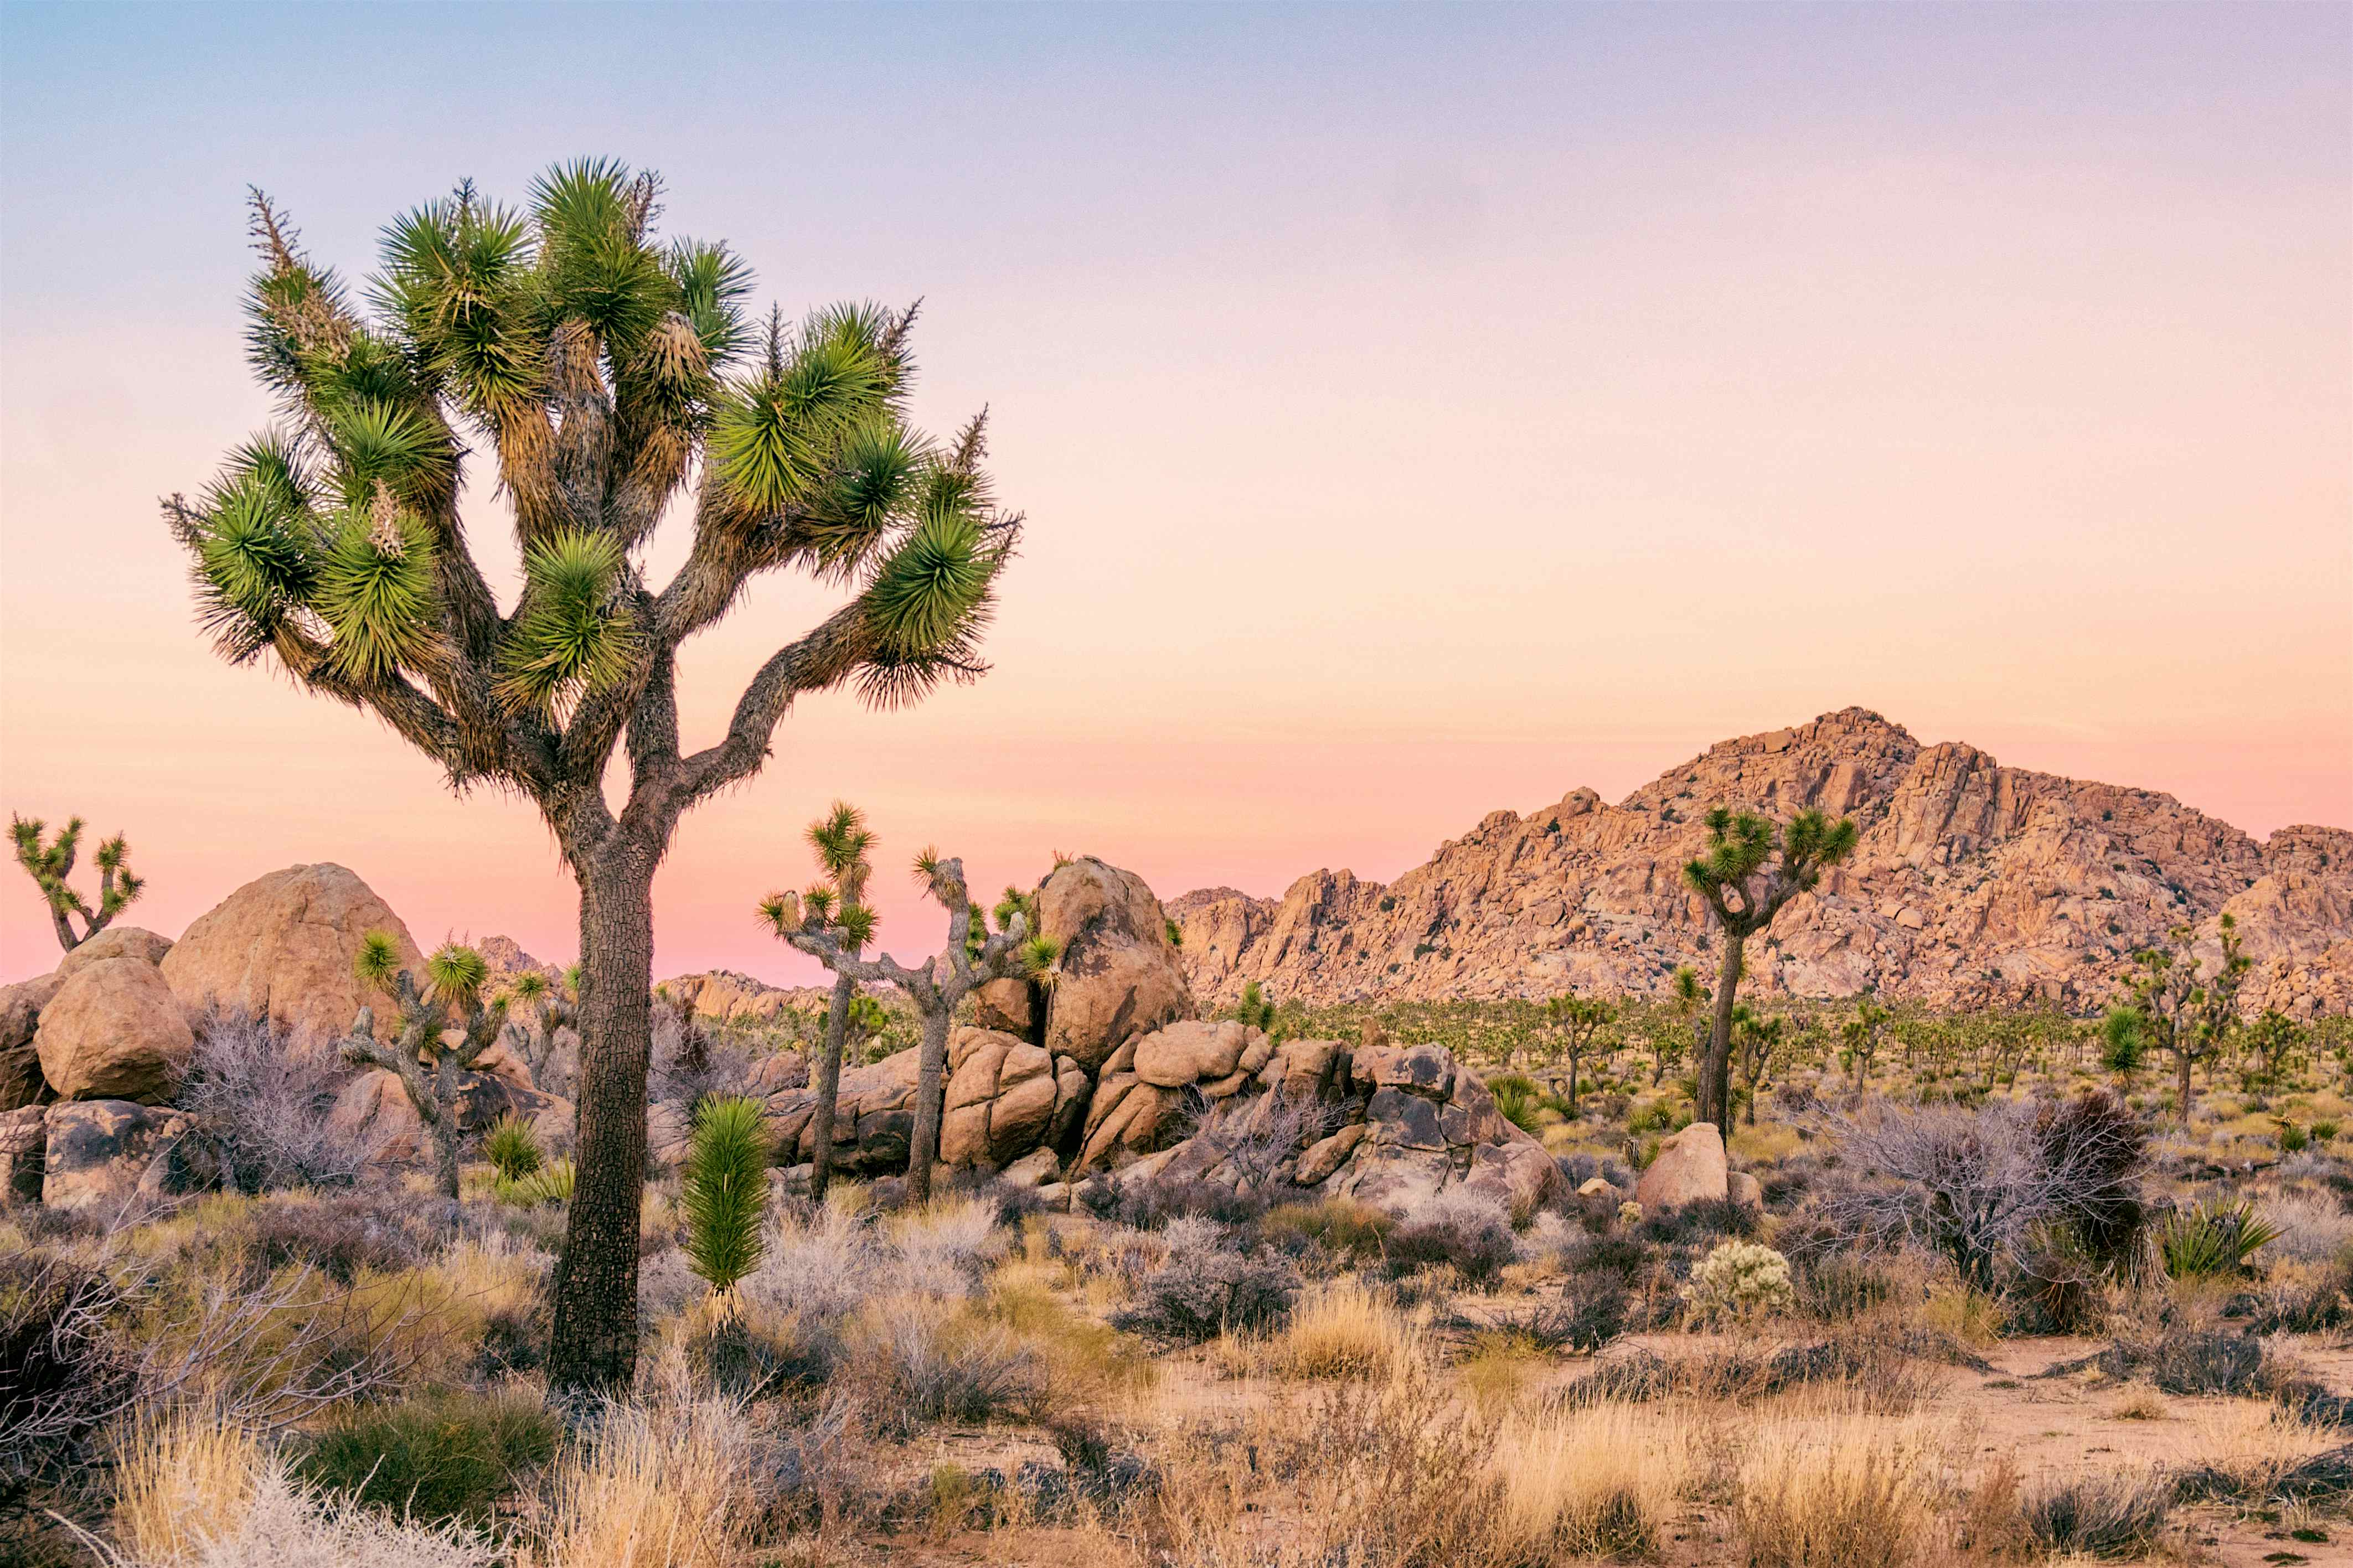 California's iconic Joshua trees may be declared endangered in effort